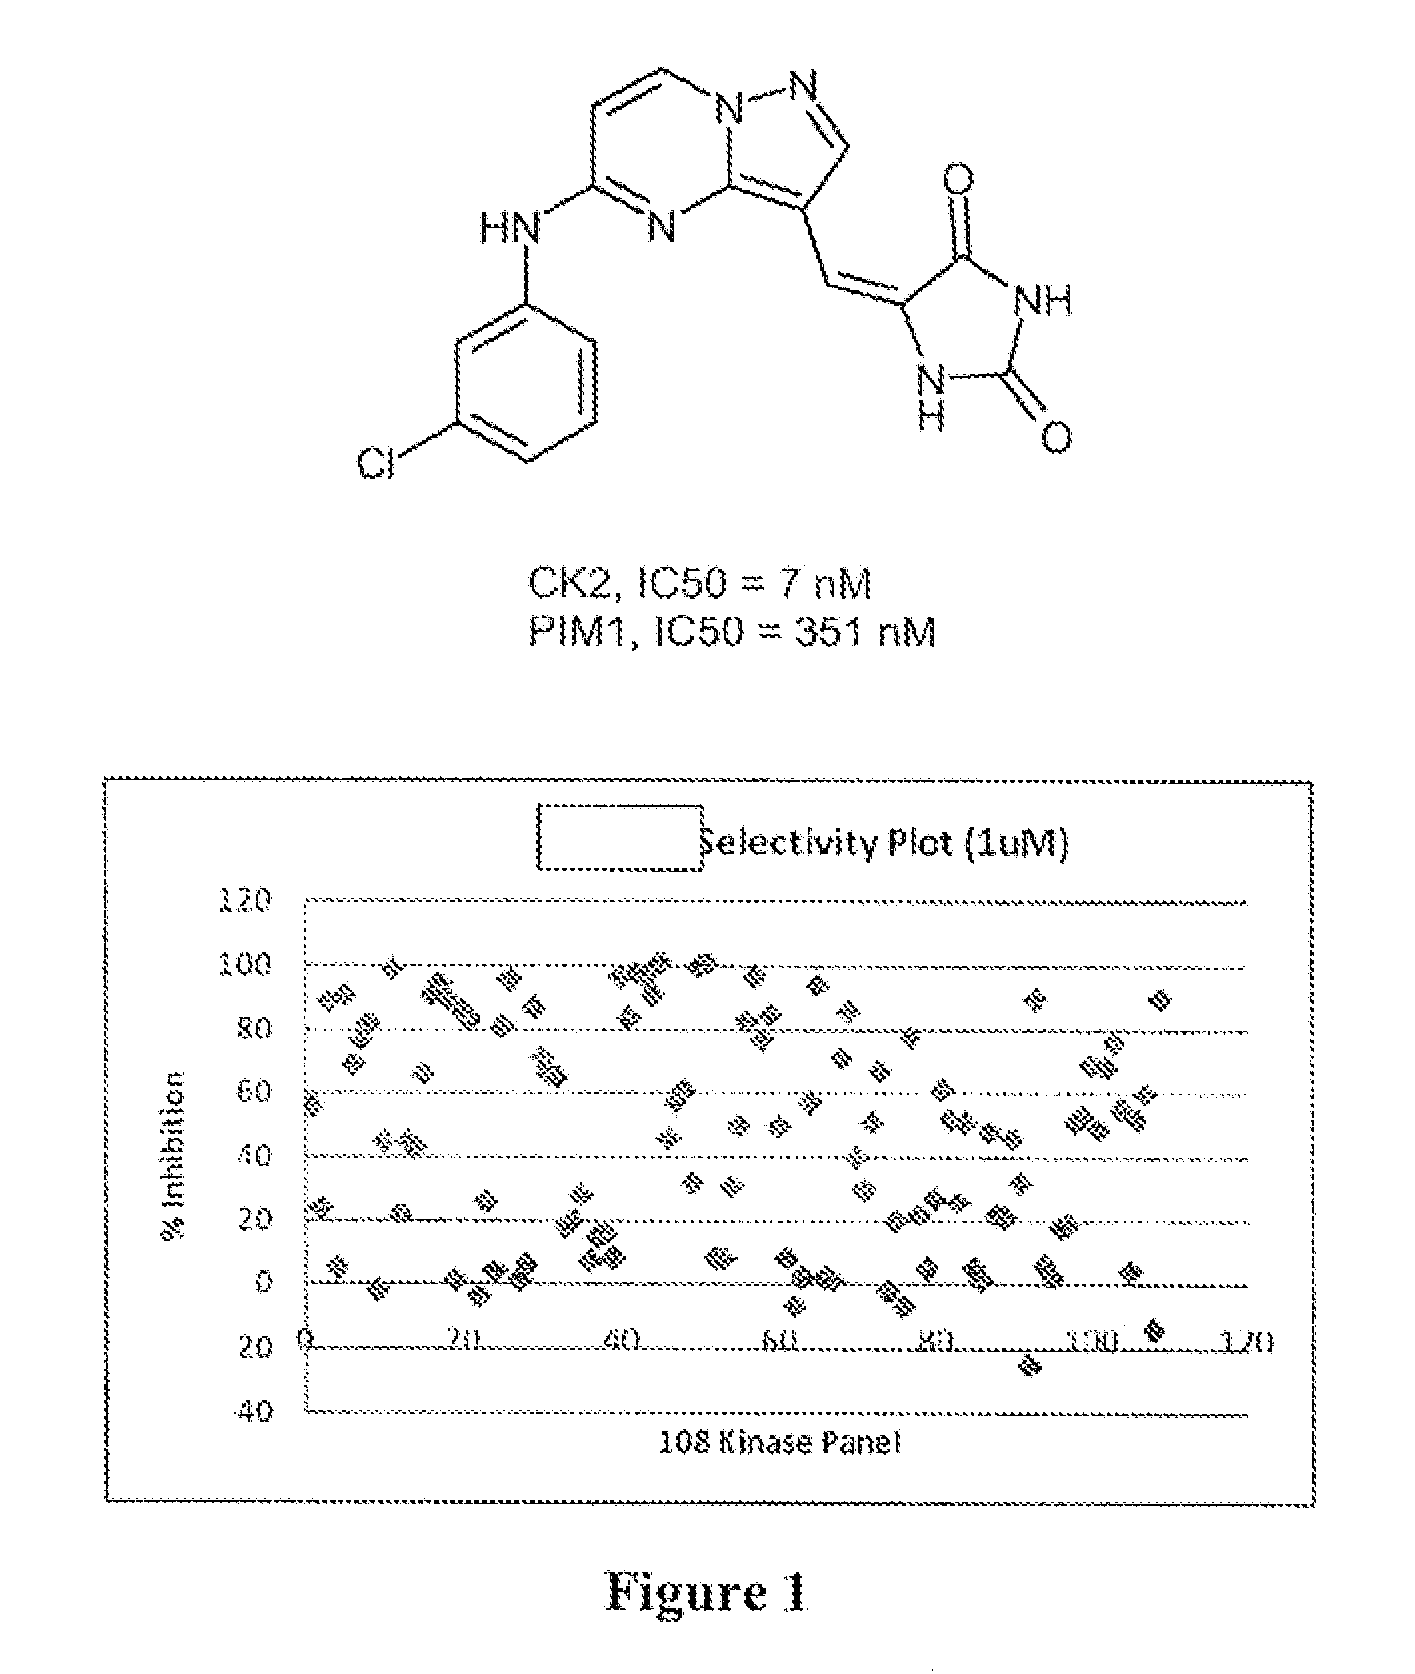 Pyrazolopyrimidines and related heterocycles as CK2 inhibitors